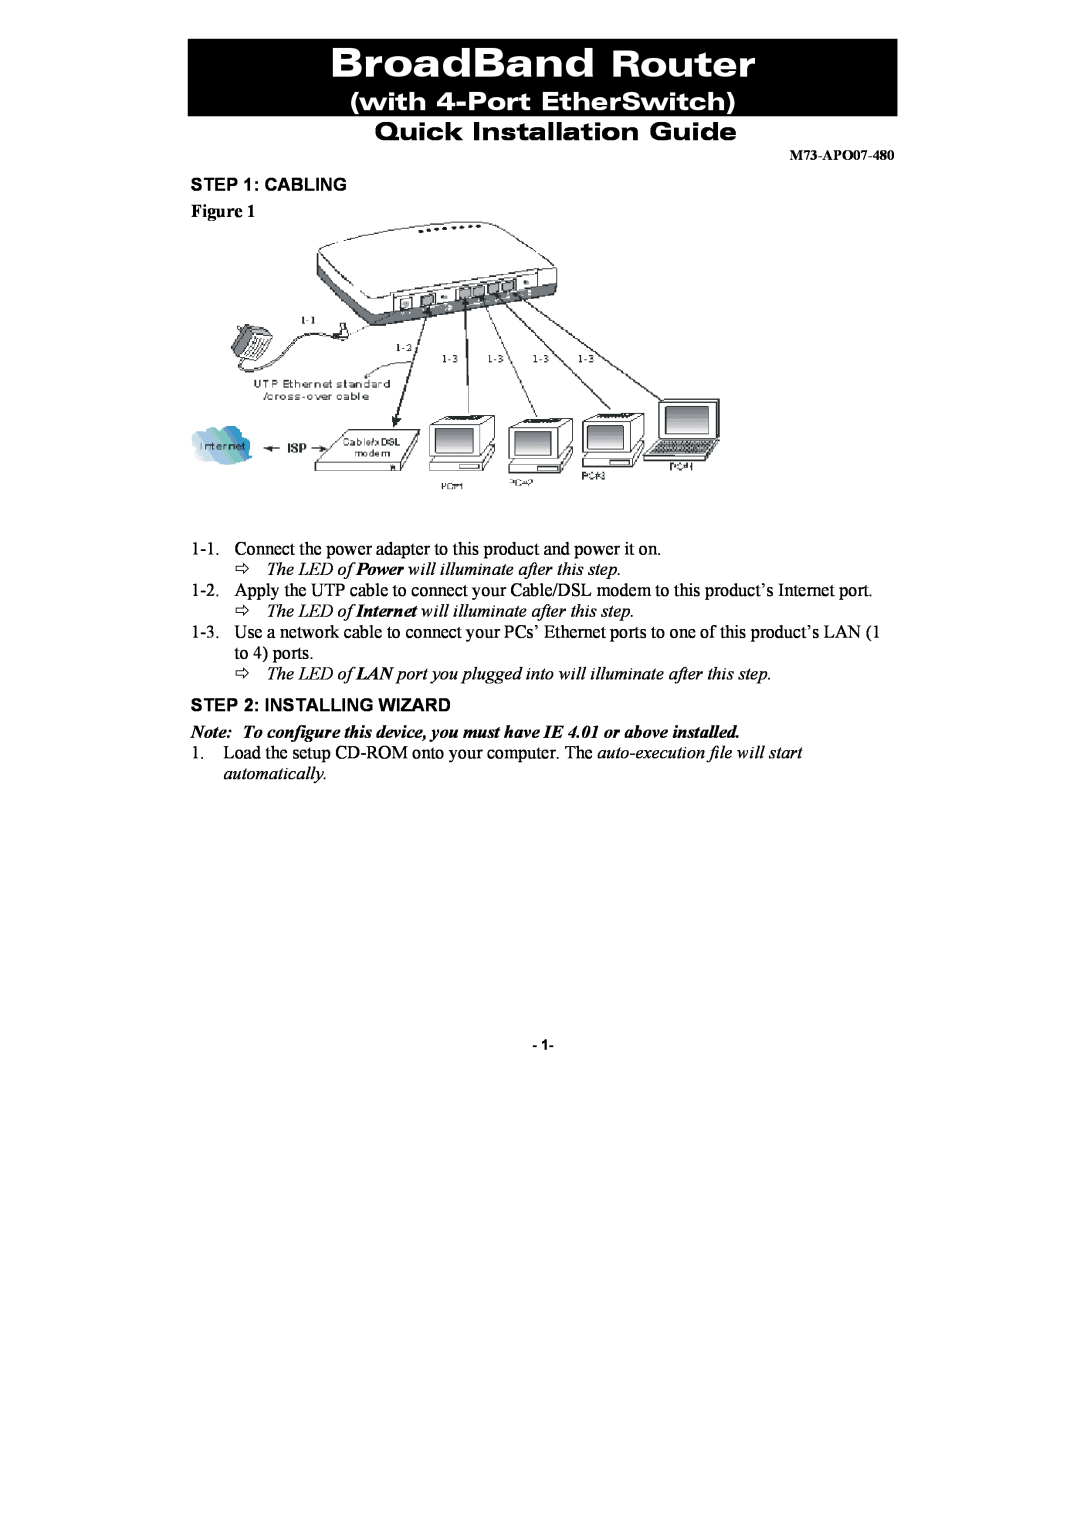 Abocom CAS3047 manual Cabling, Installing Wizard, BroadBand Router, with 4-Port EtherSwitch, Quick Installation Guide 